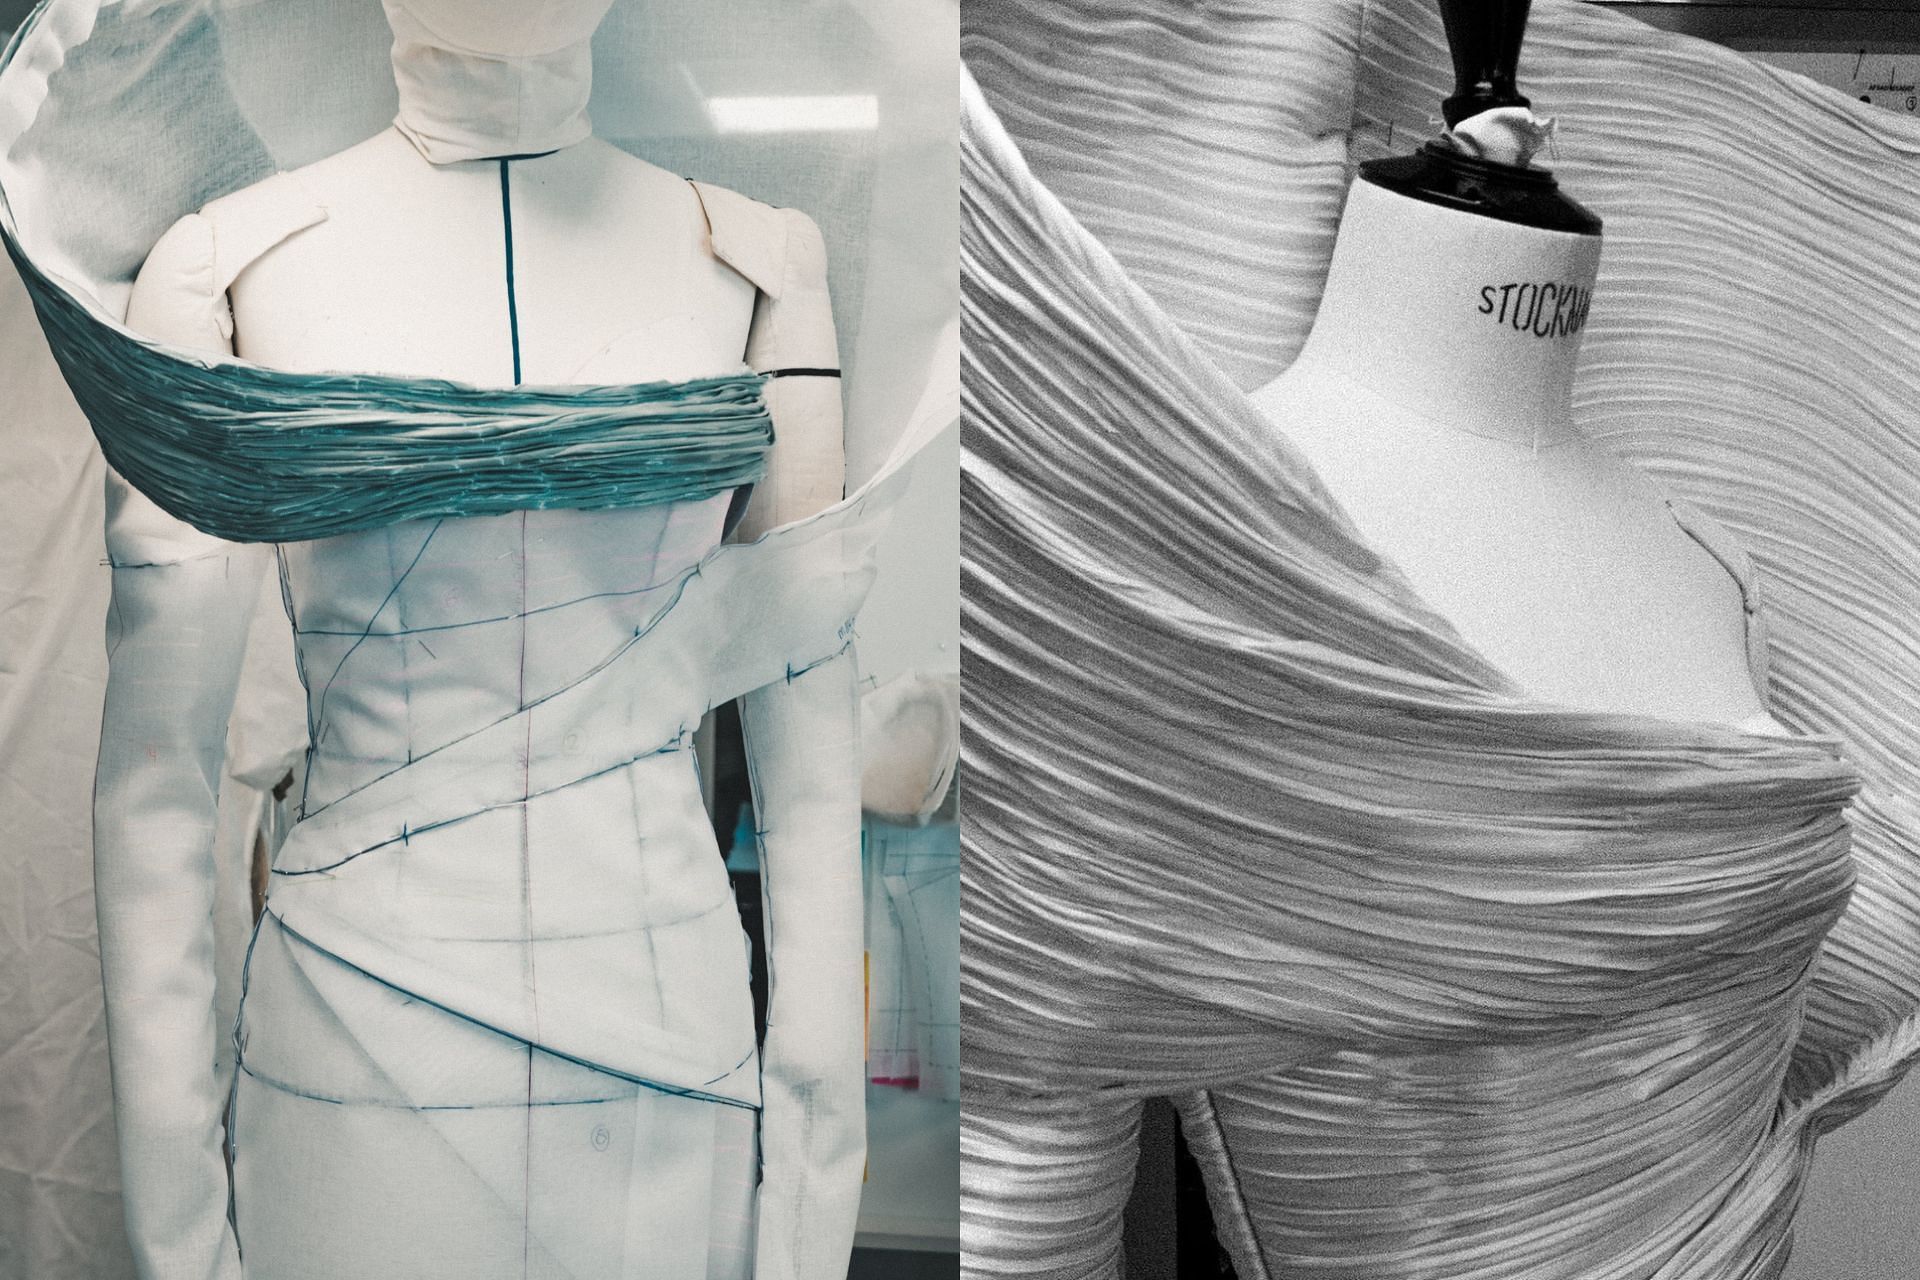 Balmain X Evian couture gown made of plastic bottles unveiling at Paris Fashion Week (Image via @evianwater / Instagram)